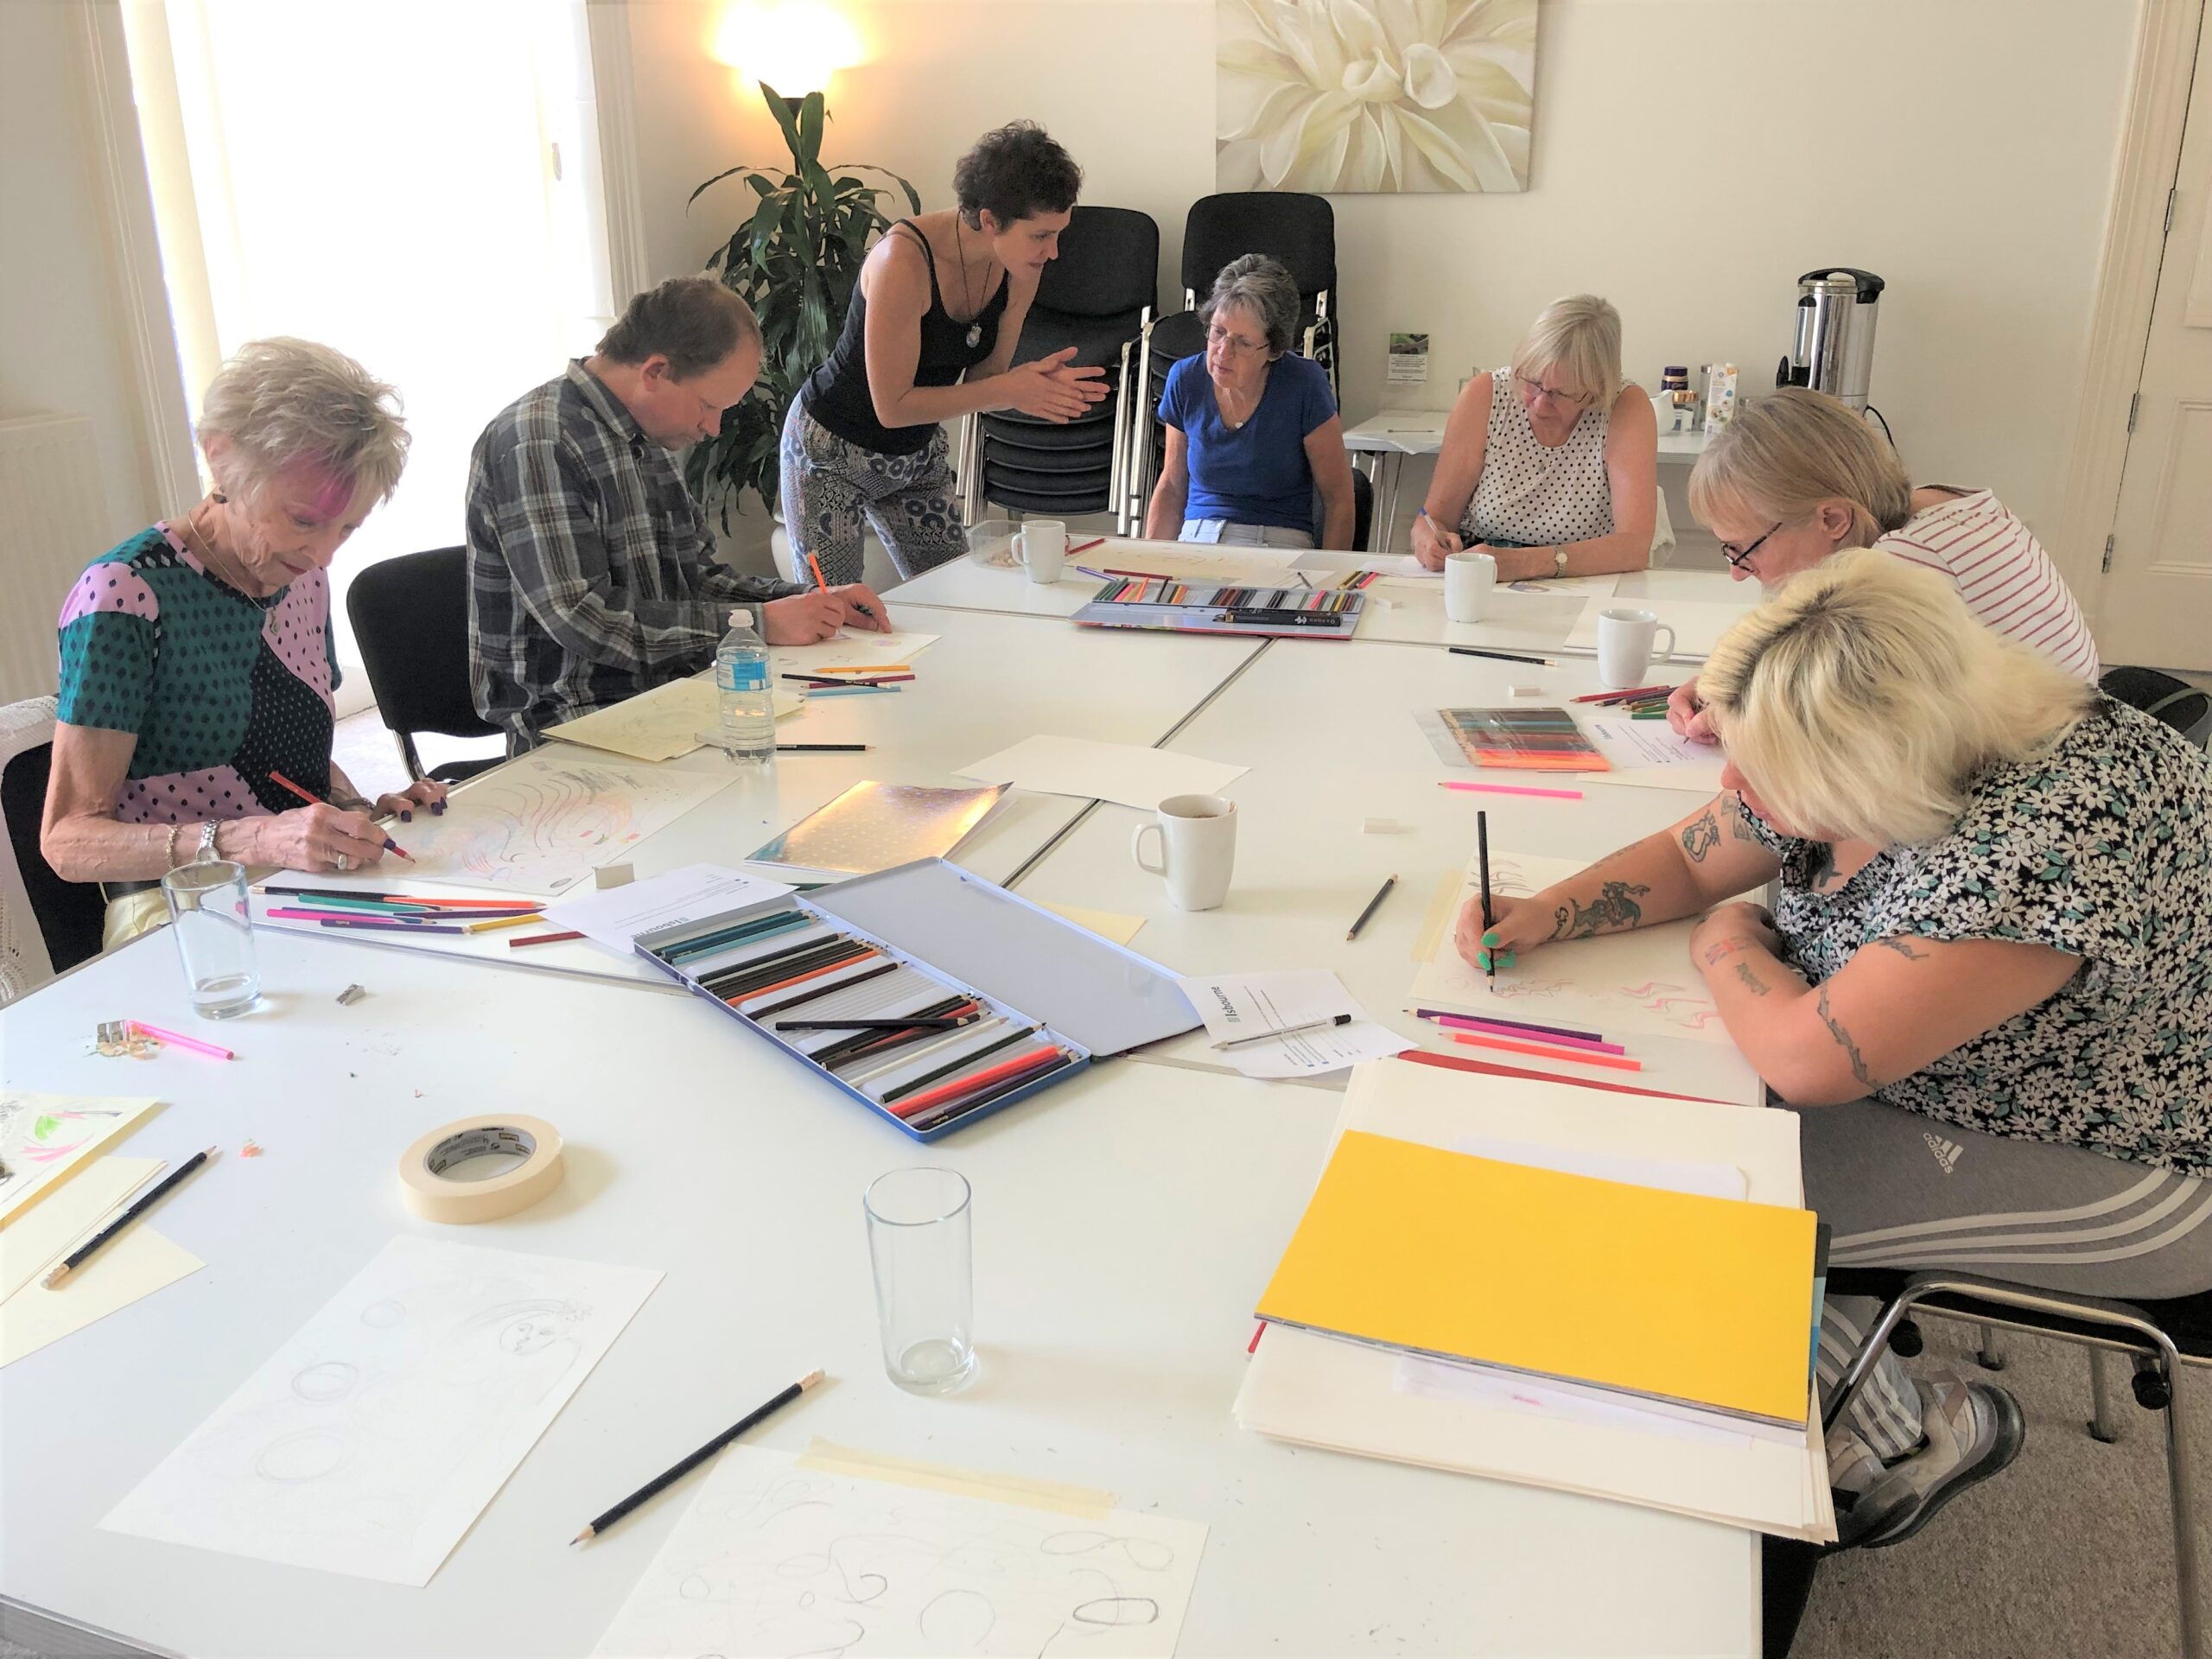 Art for Wellbeing group, with Leah Marshall an affiliated tutor with The Isbourne. A group of community wellbeing attendees are sat round a large table, with art materials, including paper and coloring pencils.